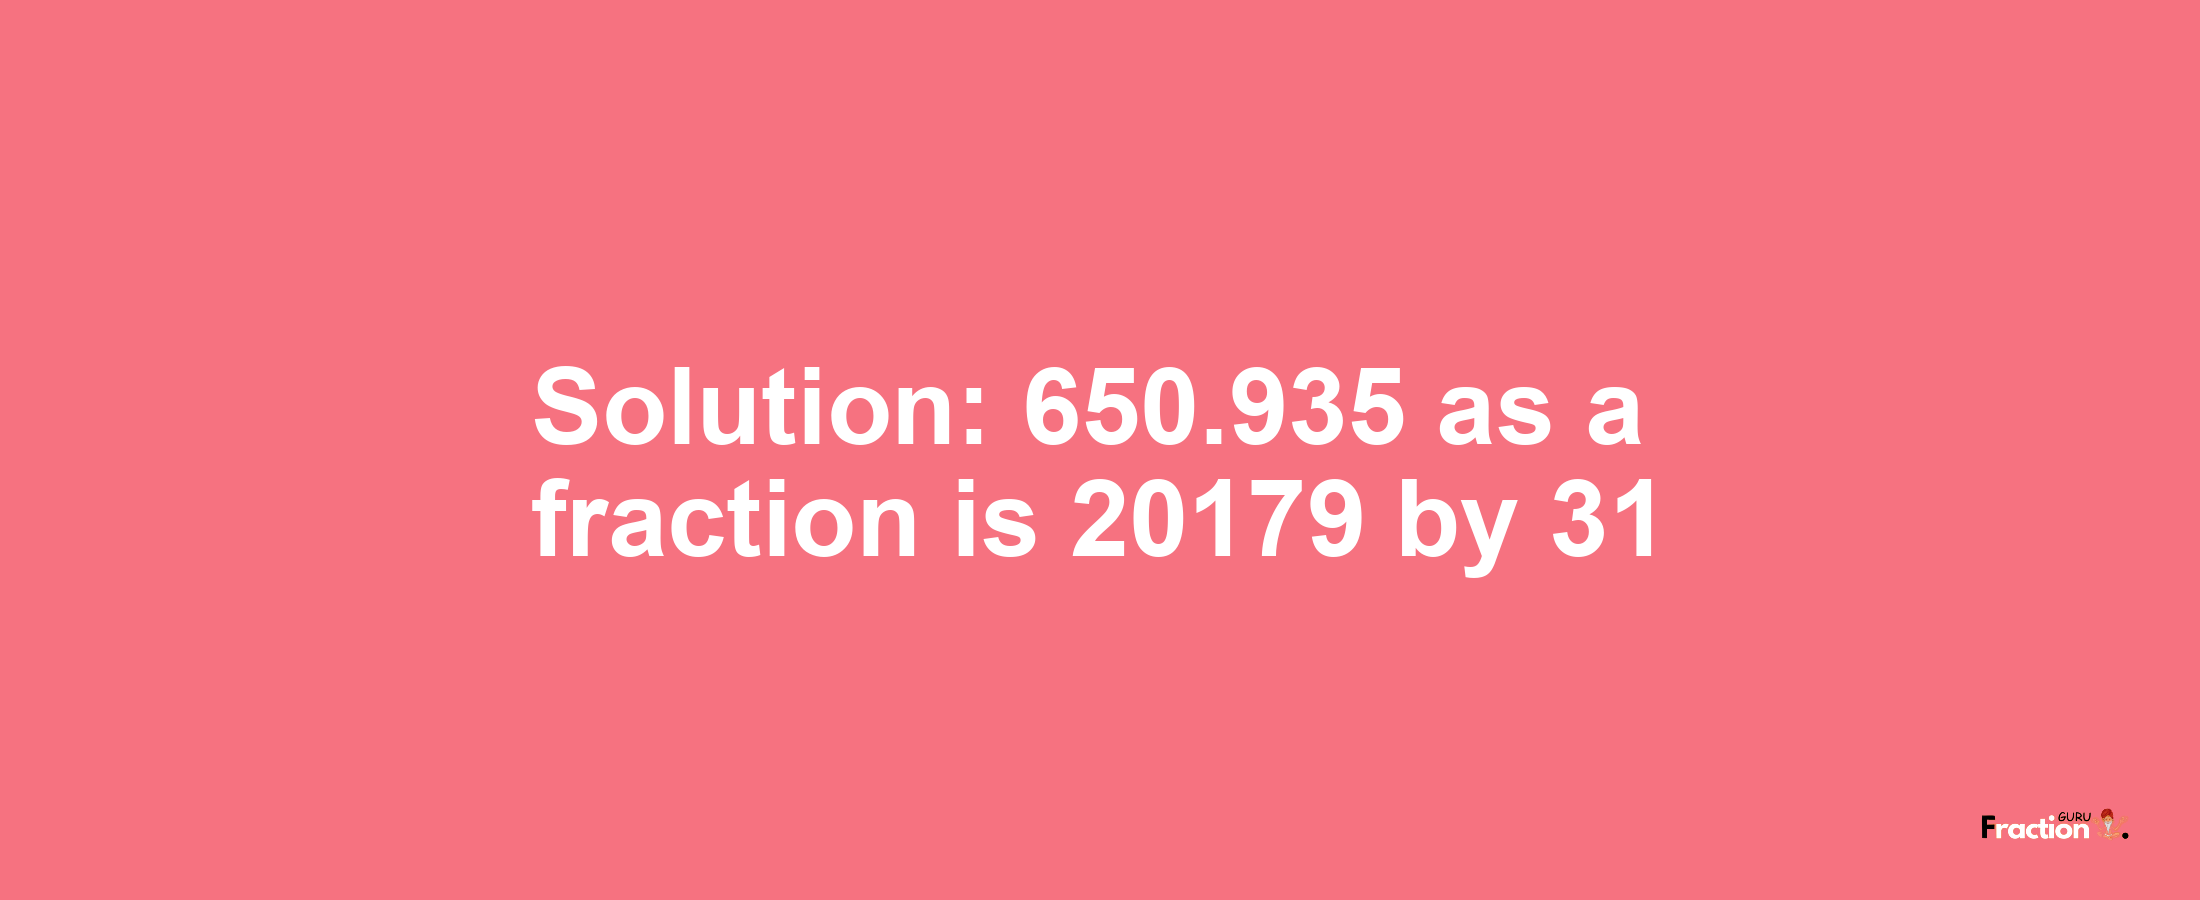 Solution:650.935 as a fraction is 20179/31